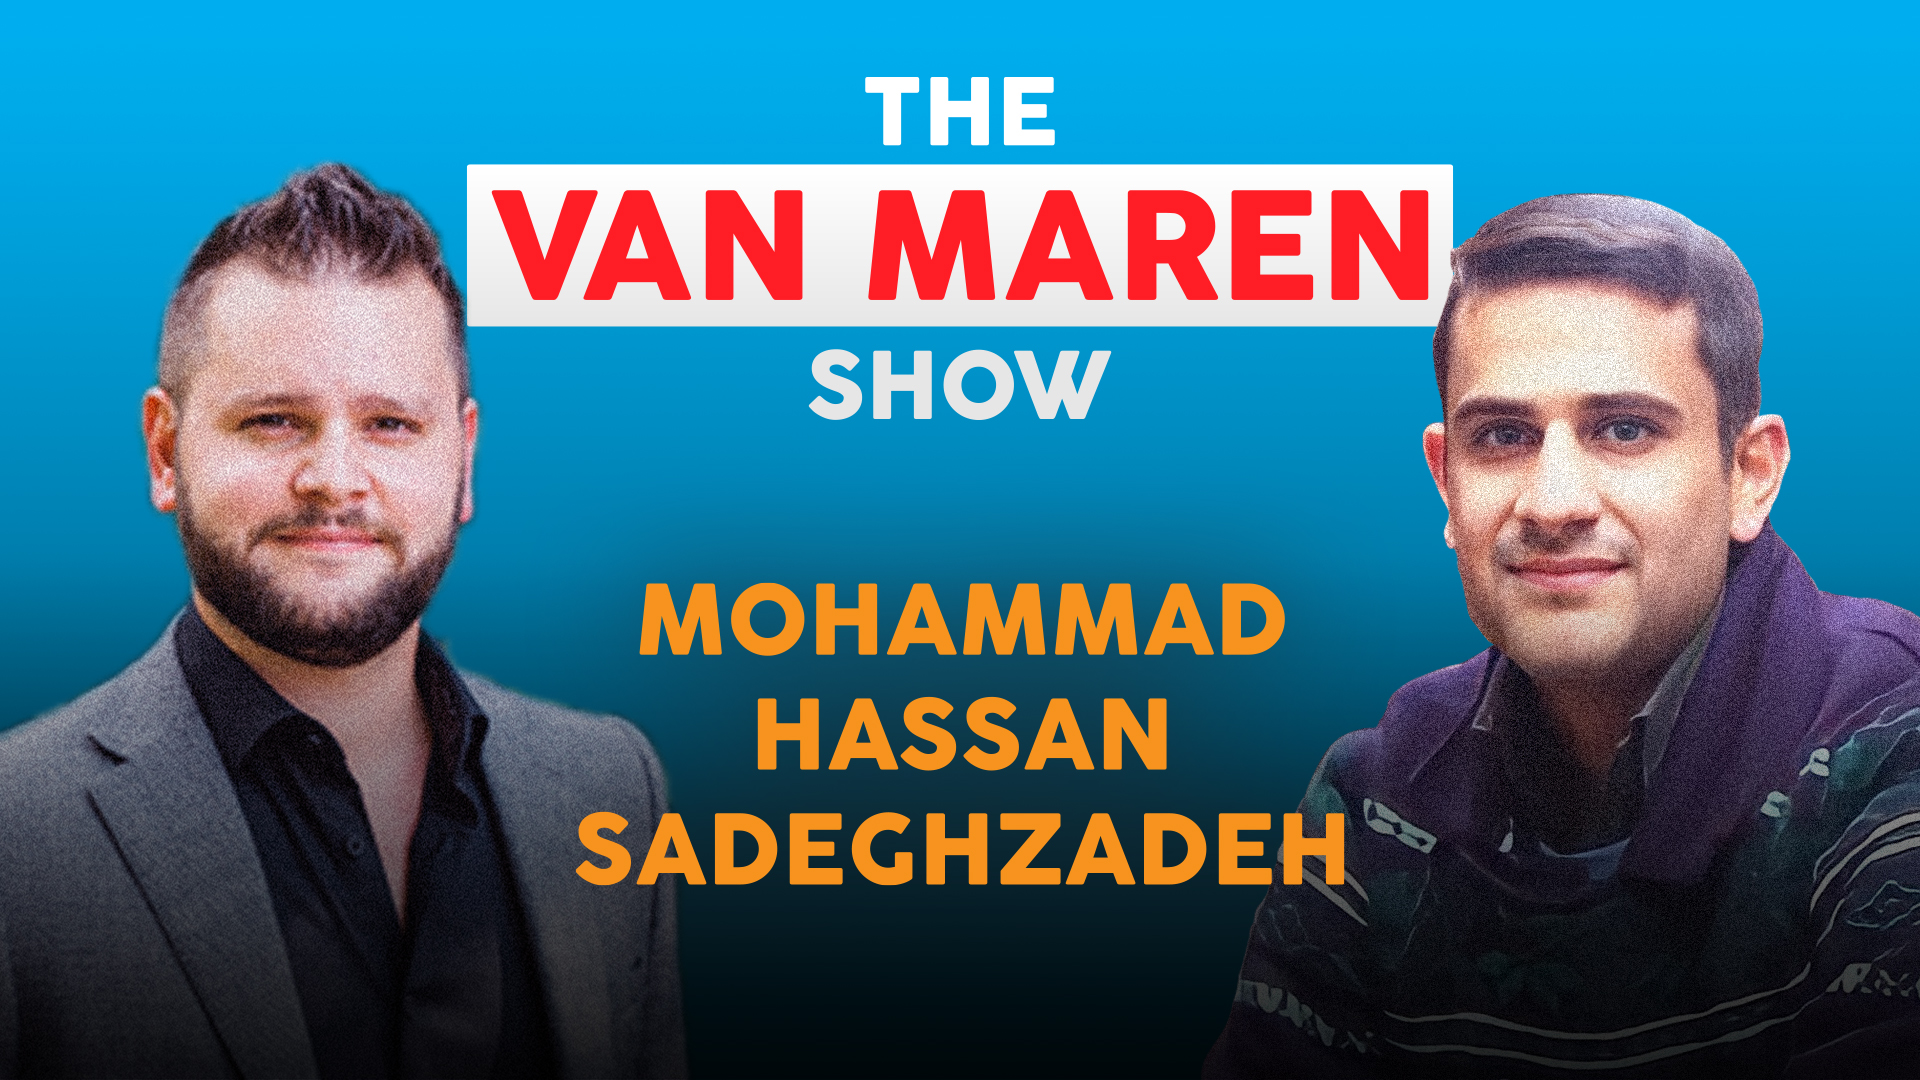 The Van Maren Show Episode 168: Iranian filmmaker goes to battle against abortion in his country